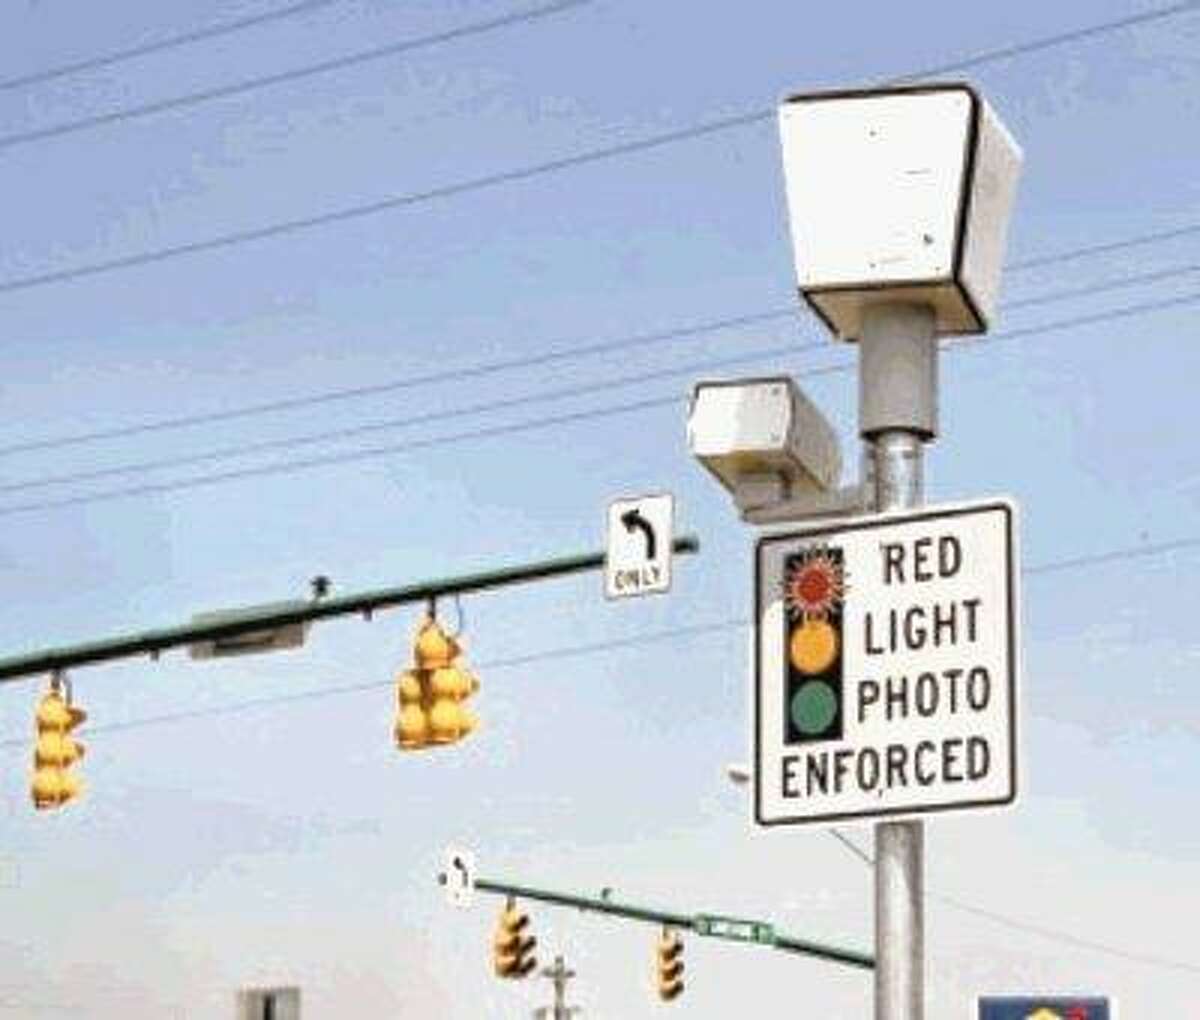 Beyond legal arguments, red light cameras are simply an oppressive way to enforce traffic laws, allowing for no nuance or subjective judgment, Hewing F. Van Der Grinten, founder of Houston Coalition Against Red Light Cameras, said in July 2018.